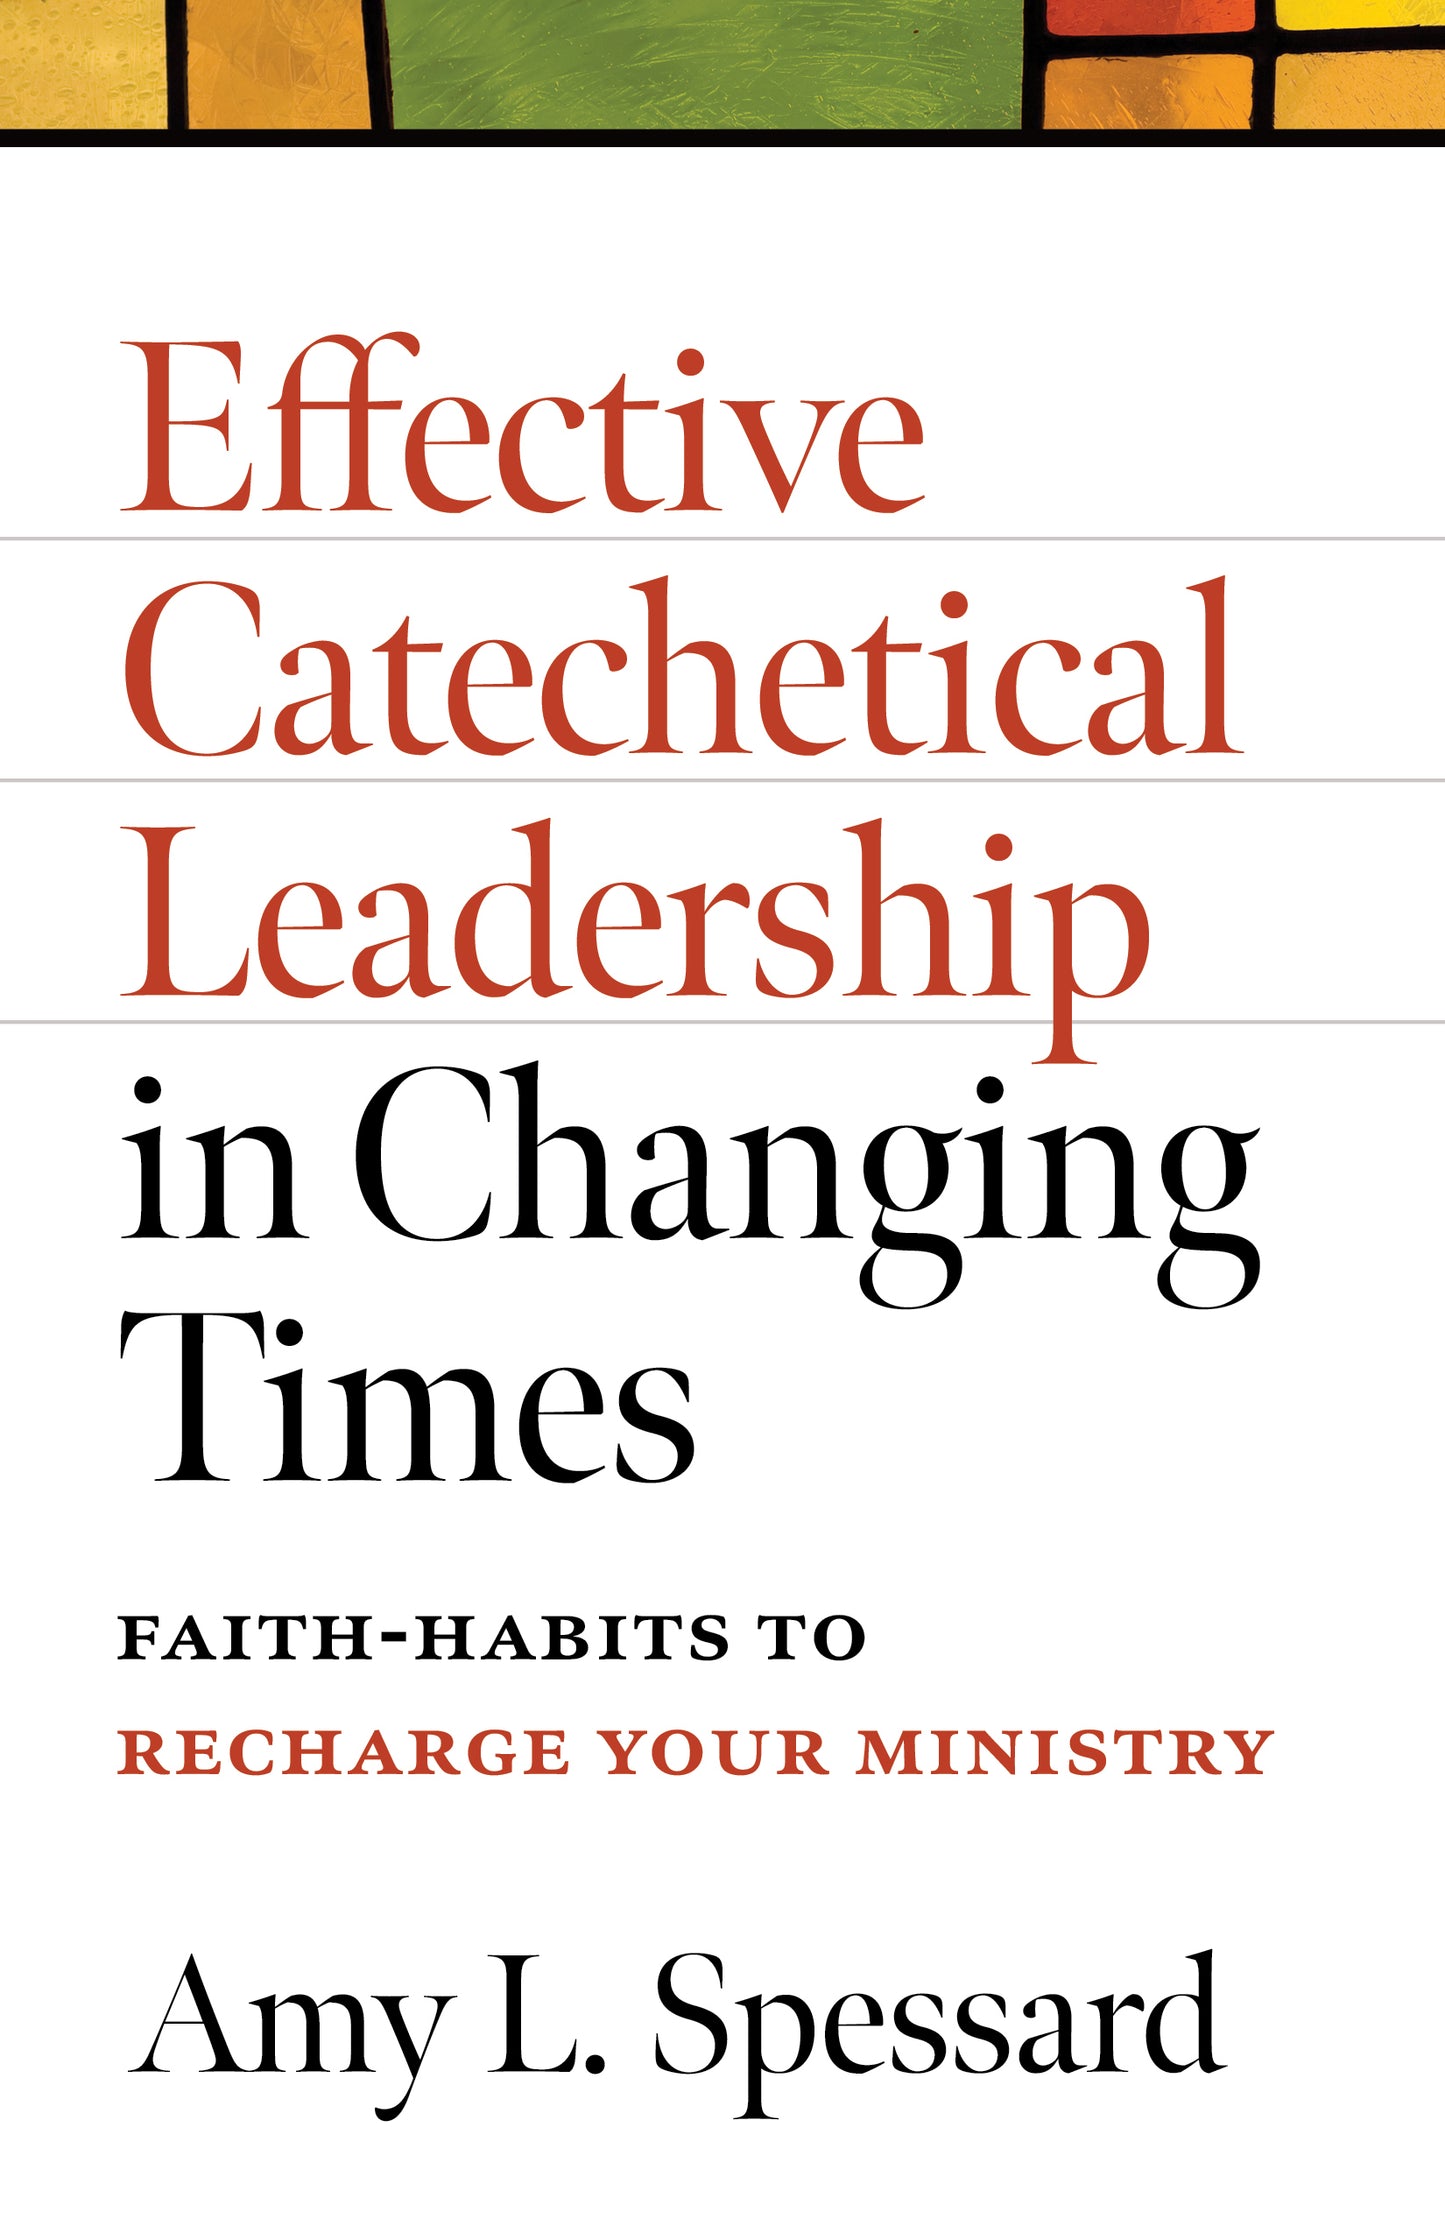 SALE - Effective Catechetical Leadership in Changing Times